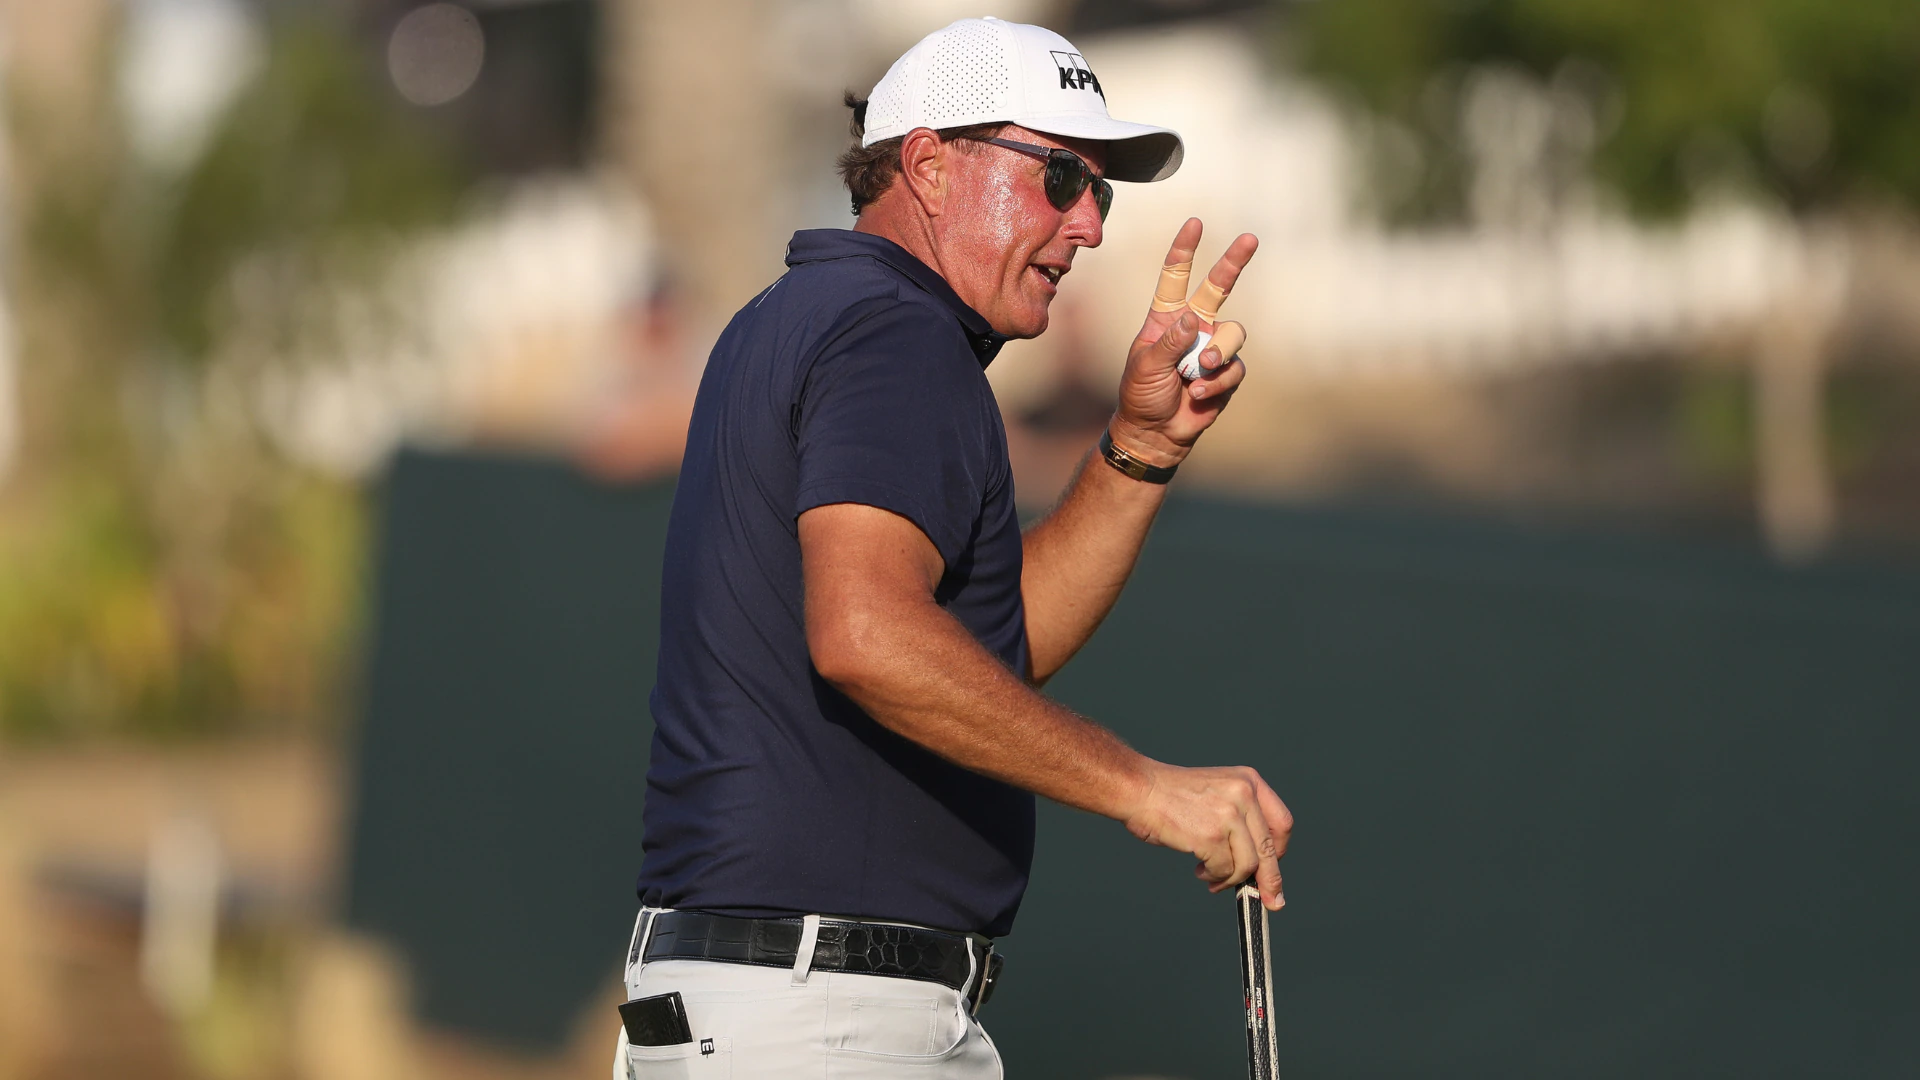 Phil Mickelson lost $40 million to gambling from 2010-2014, according to biographer